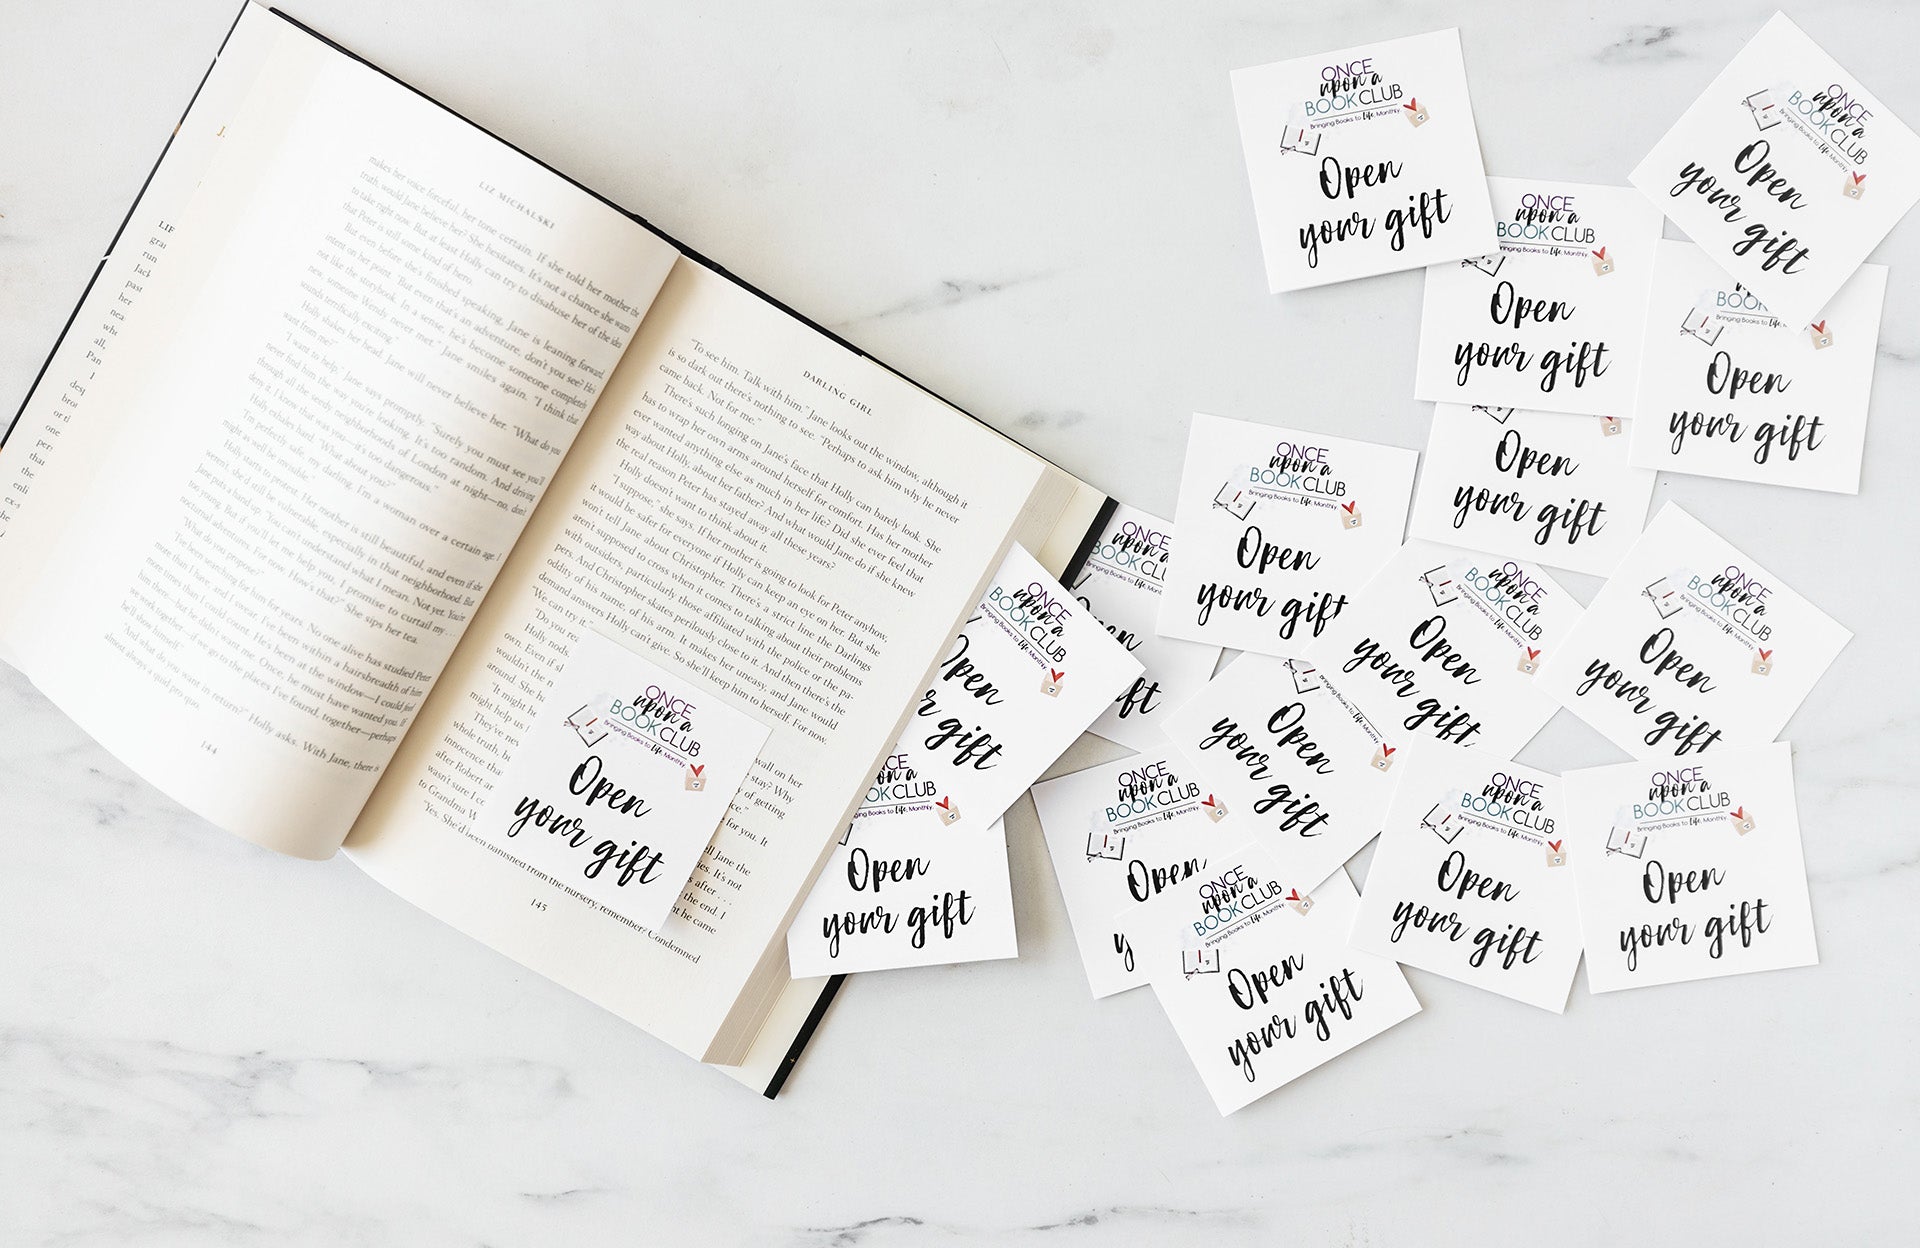 Book Subscription Boxes & Bookish Gifts - Once Upon a Book Club